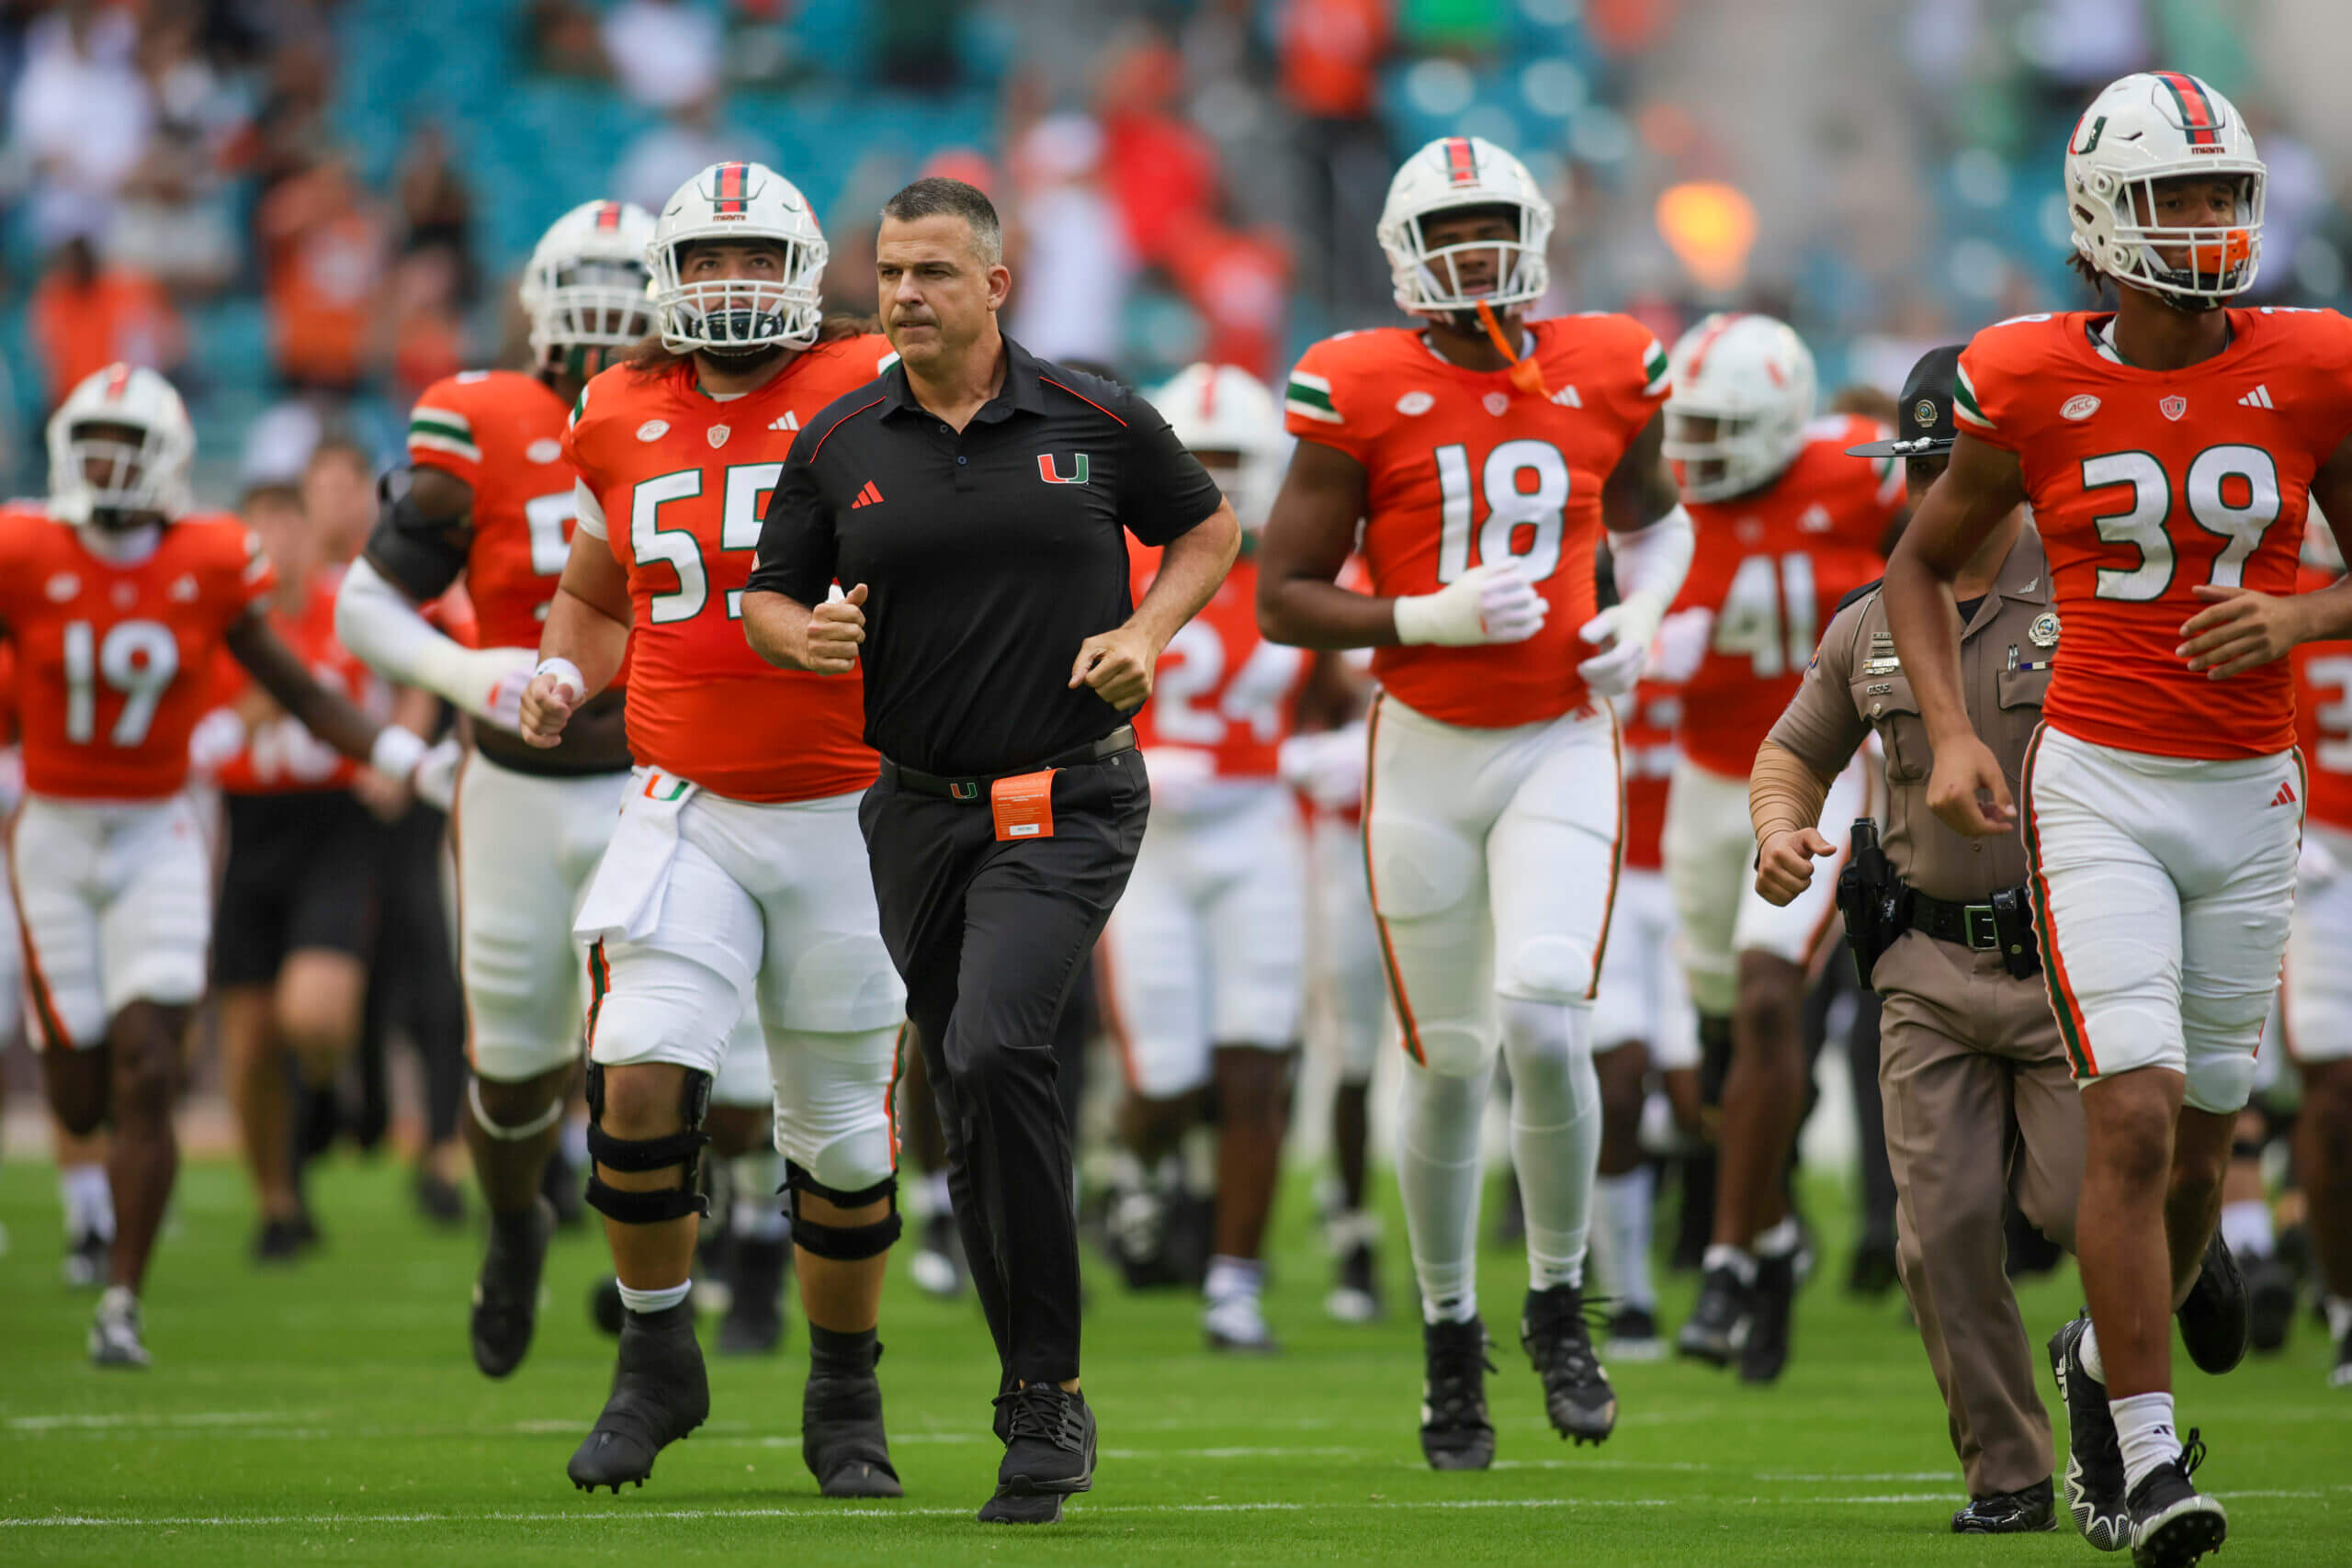 Miami’s roster is set up for success — it’s time for the Canes, and their coach, to deliver